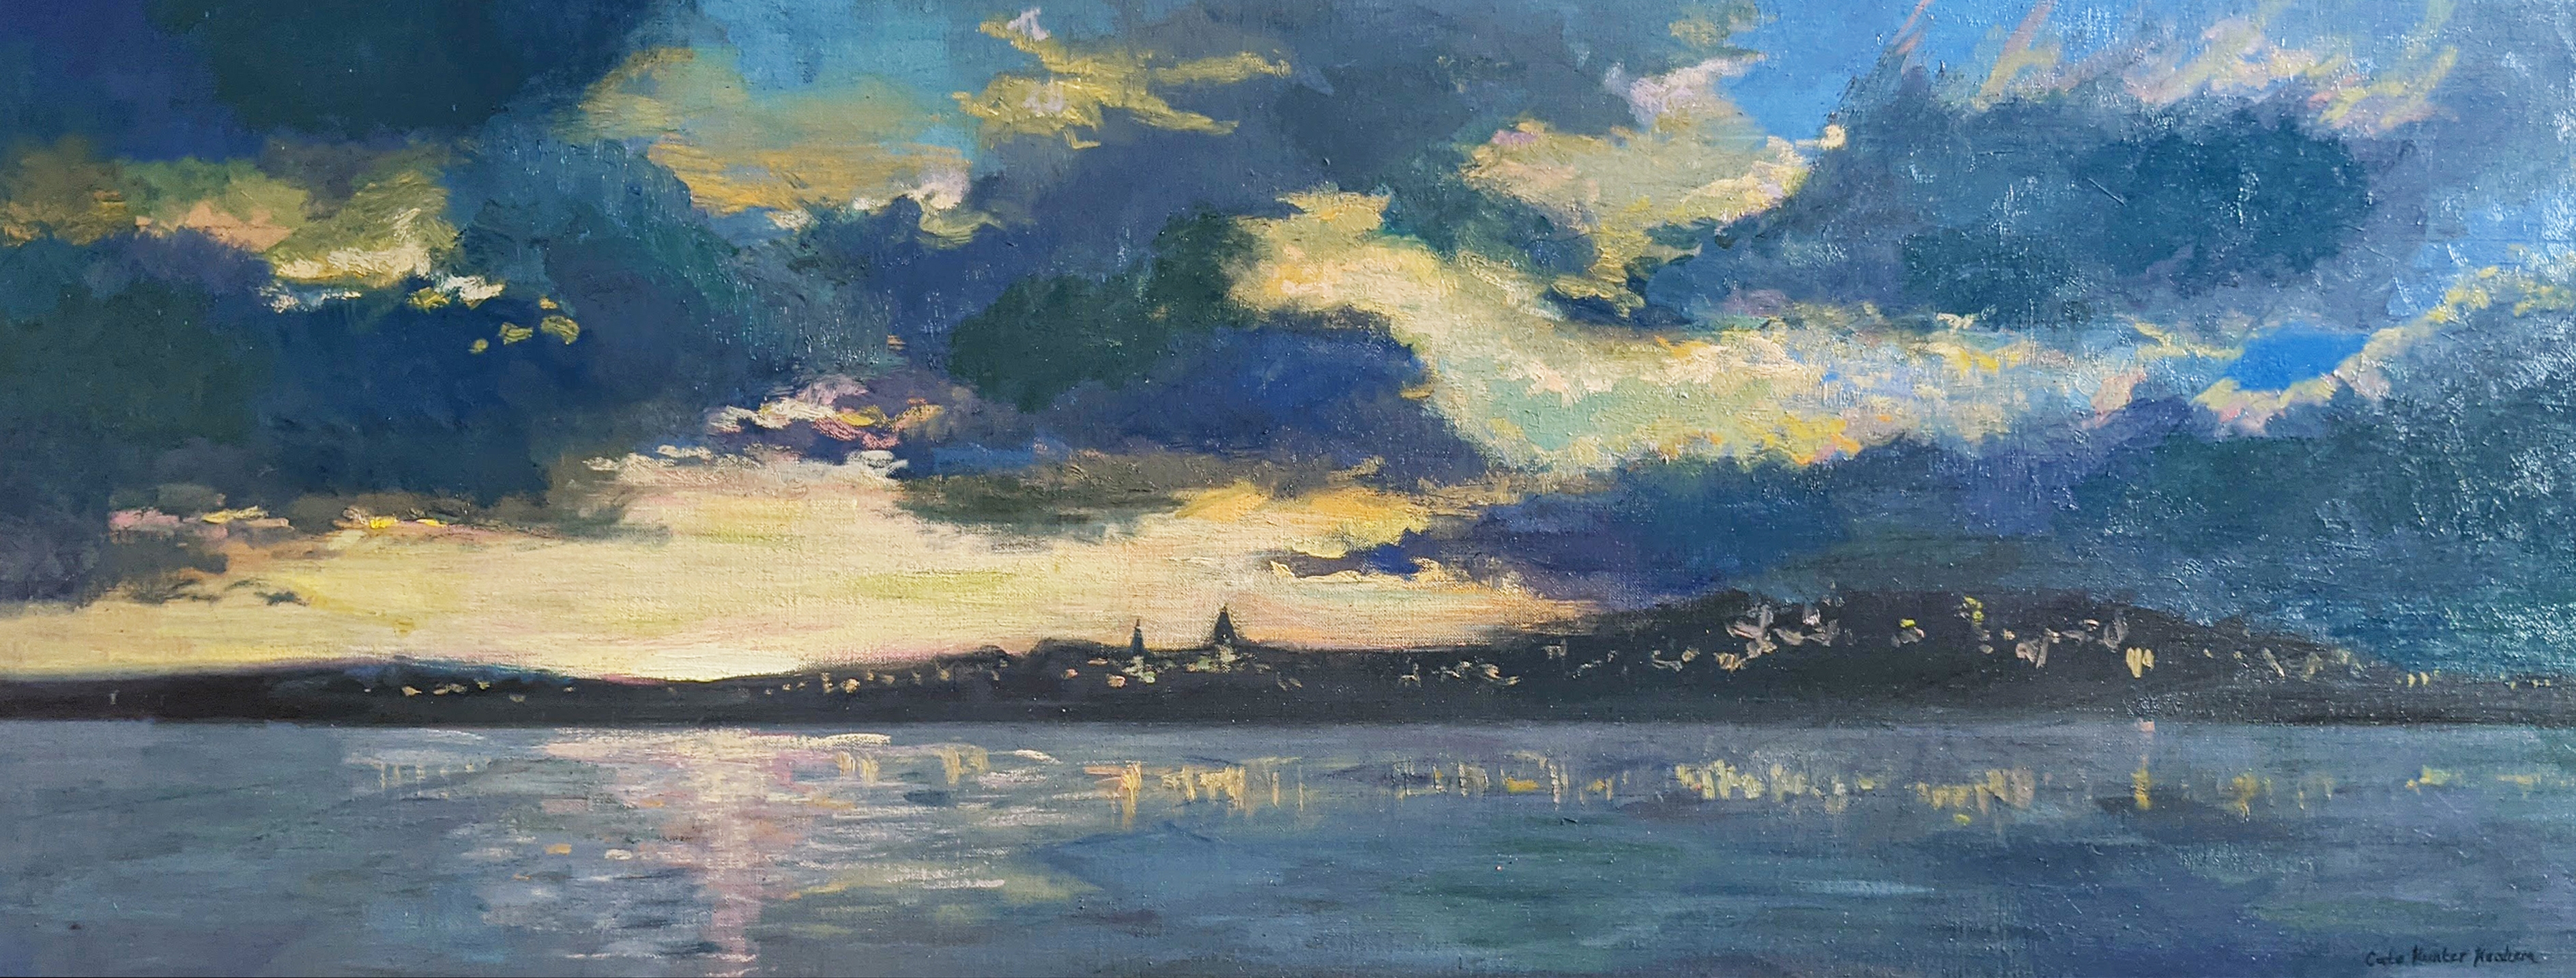 Blue Sunset Painting over the Ocean